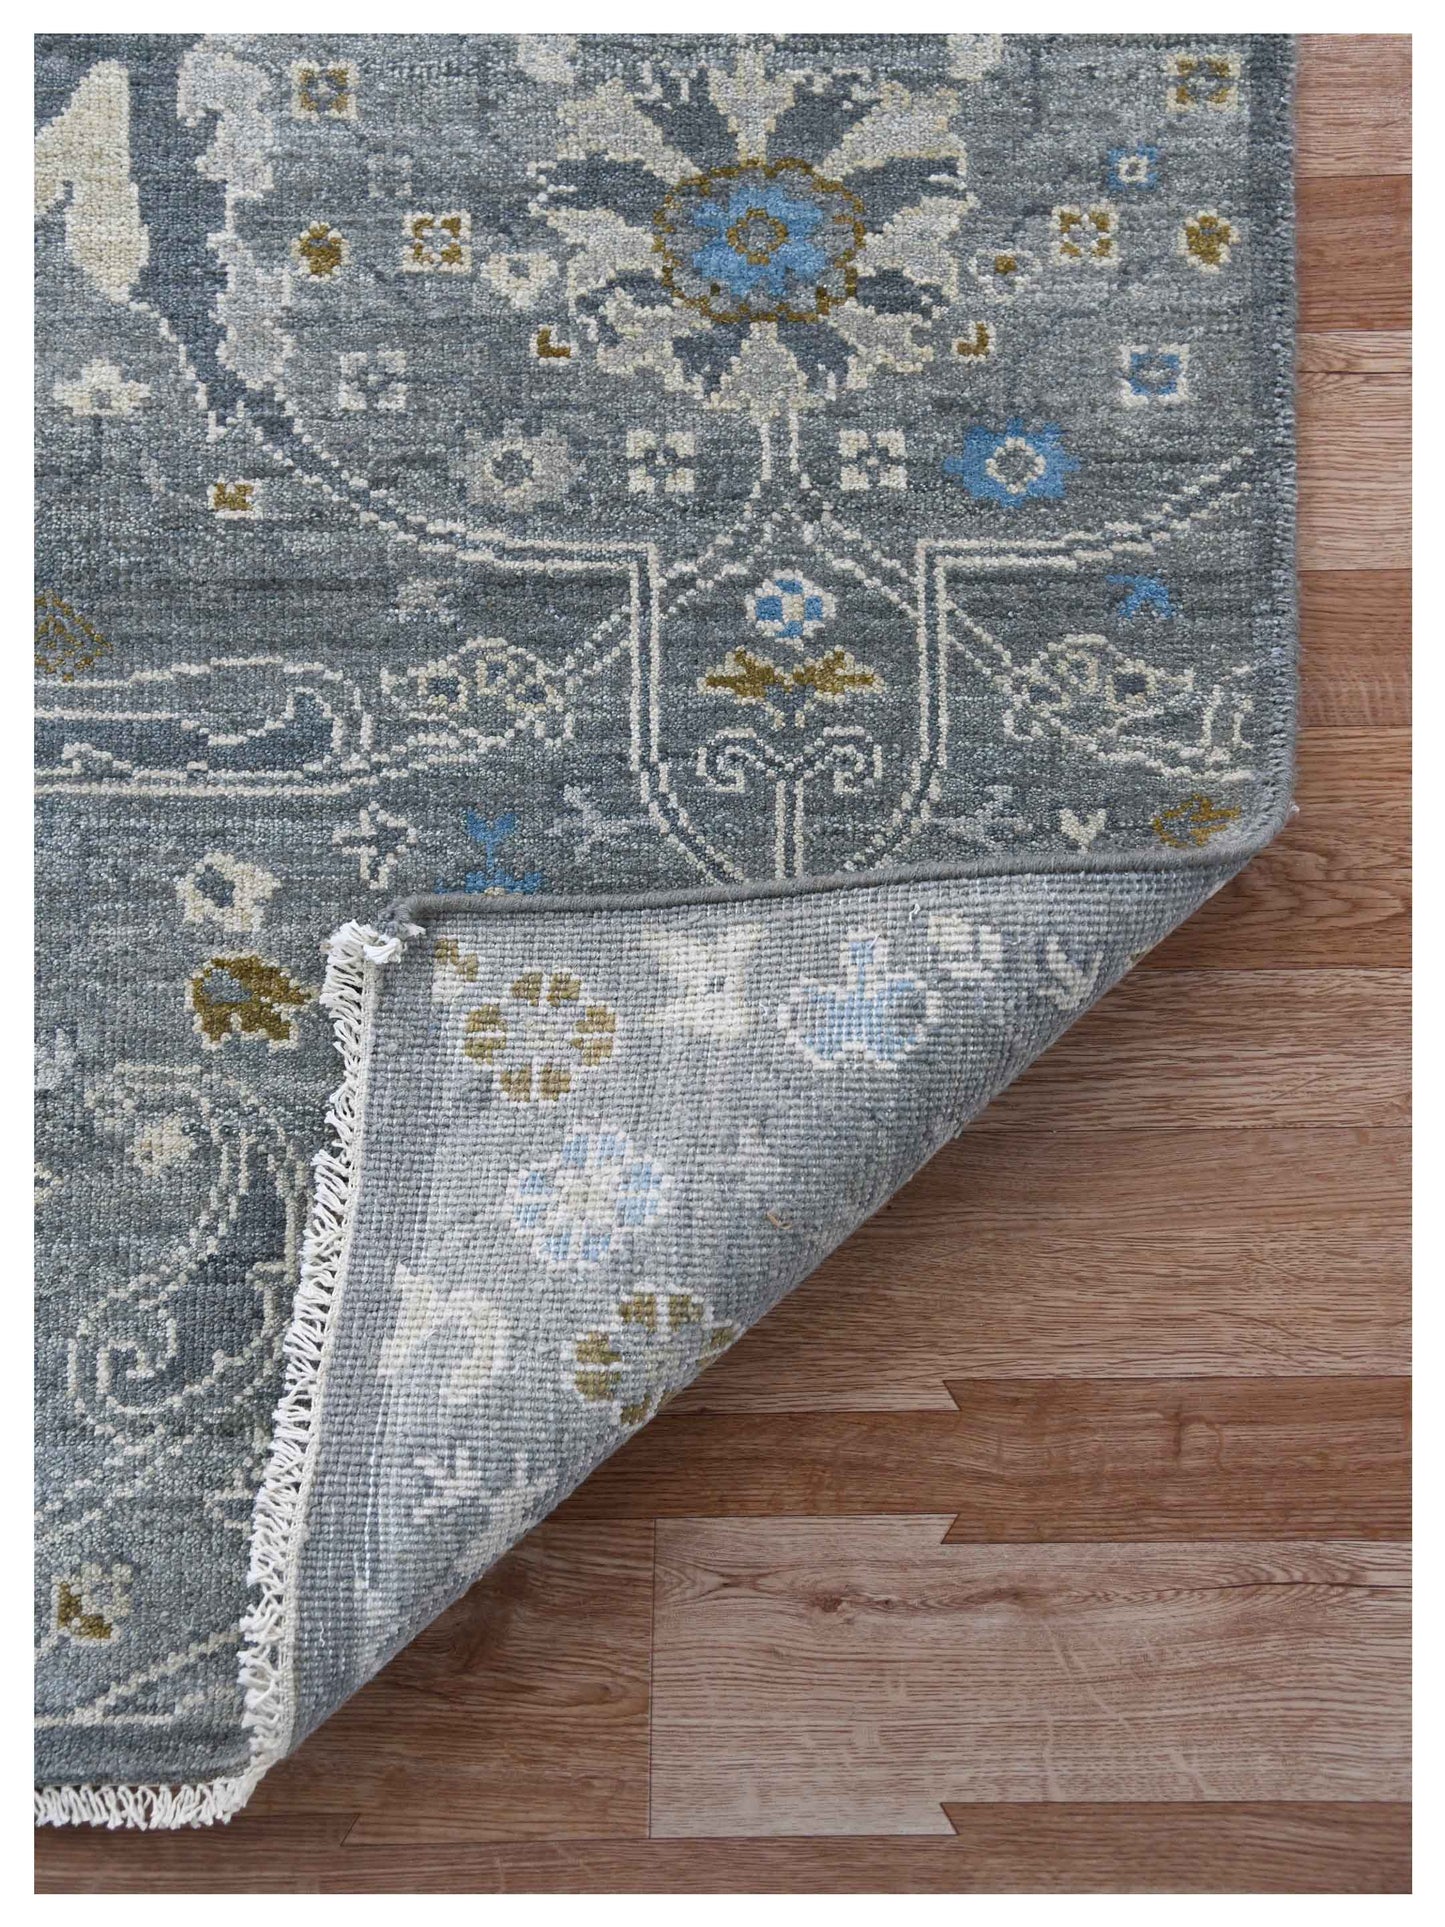 Limited Bailee BNS-500 SANTAS GRAY  Traditional Knotted Rug